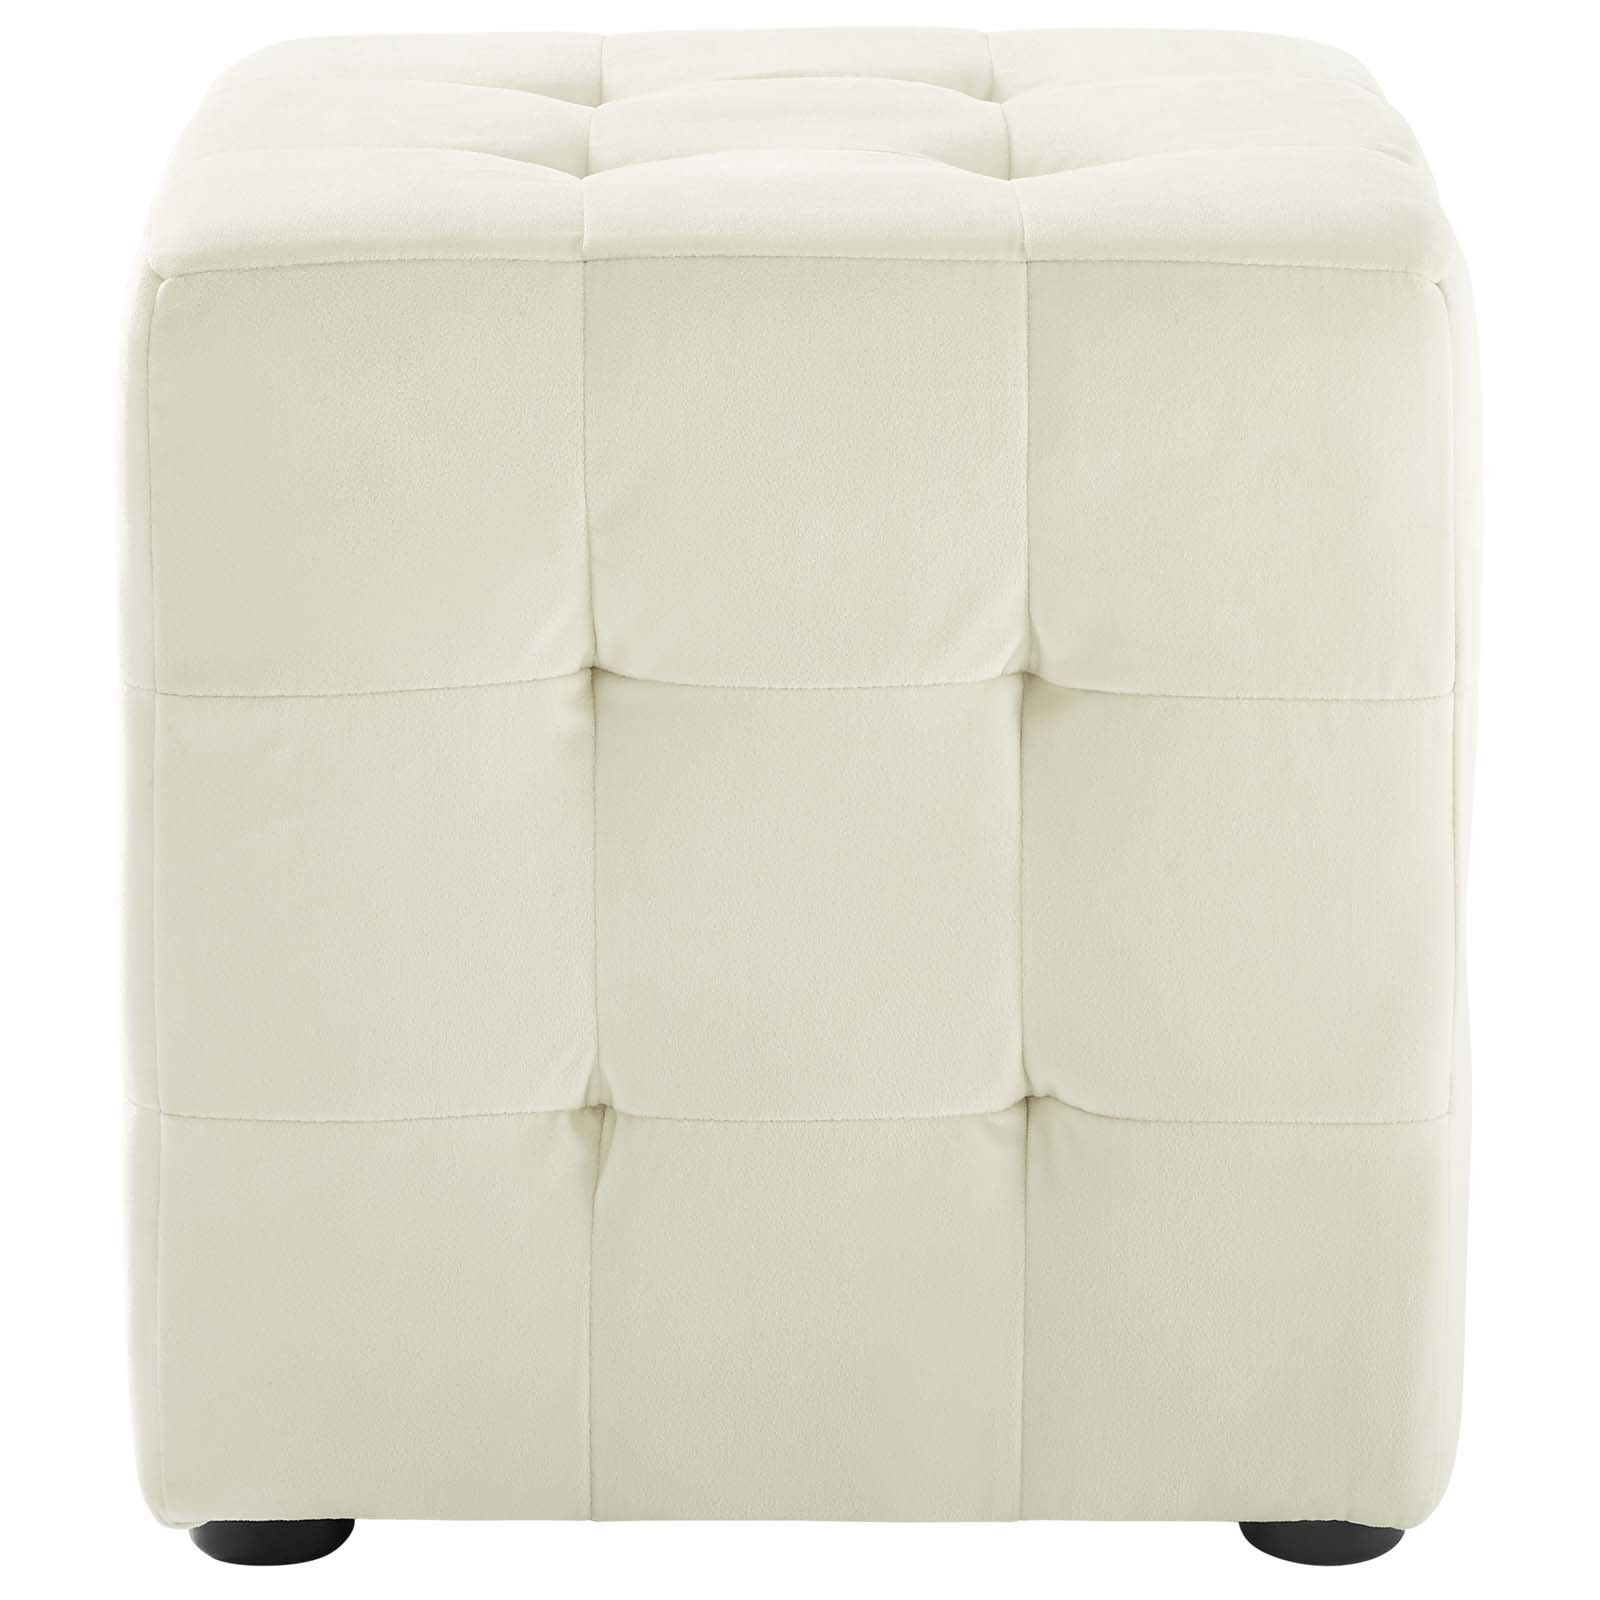 Contour Ivory Tufted Cube Performance Velvet Ottoman Eei 3577 Ivo Inside Light Blue And Gray Solid Cube Pouf Ottomans (Gallery 19 of 20)